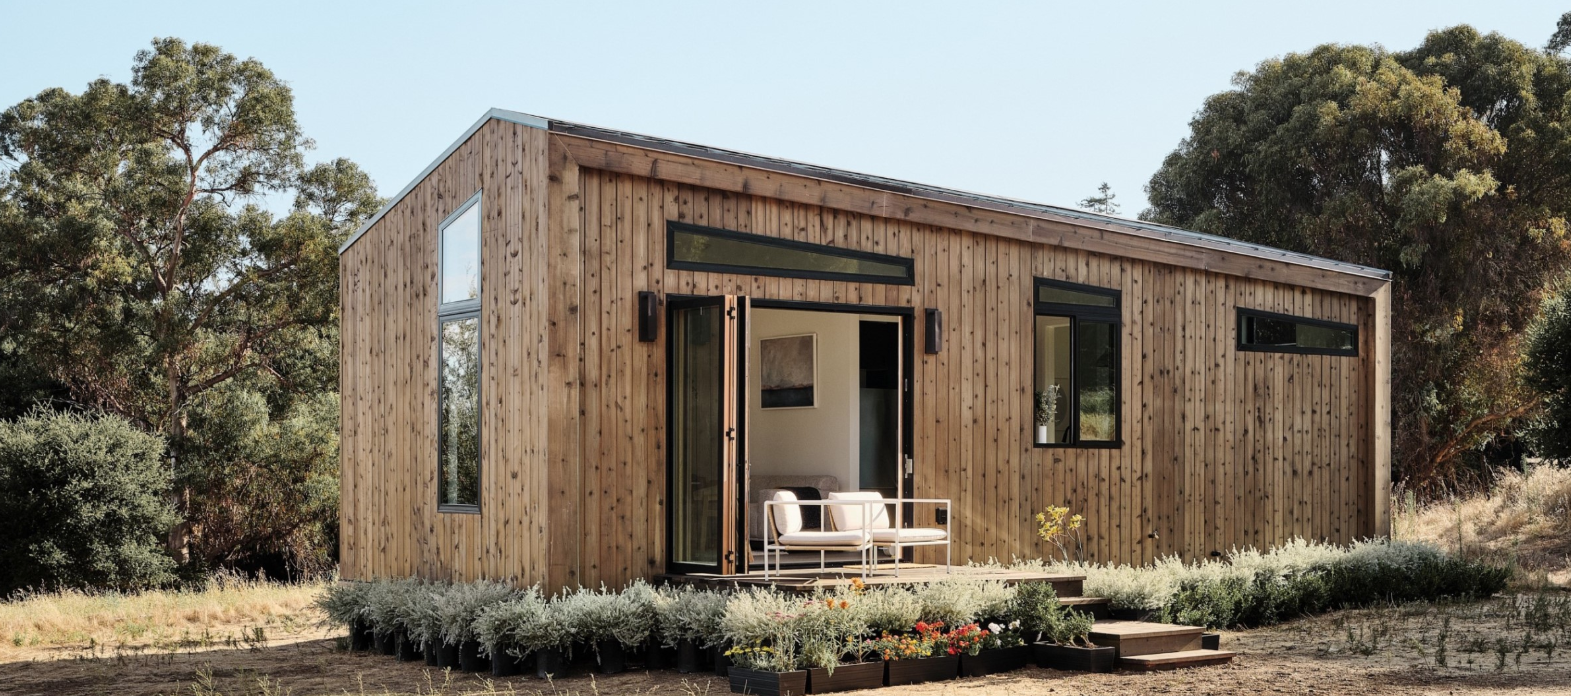 How Much Does It Cost To Build A Tiny House? – Forbes Home